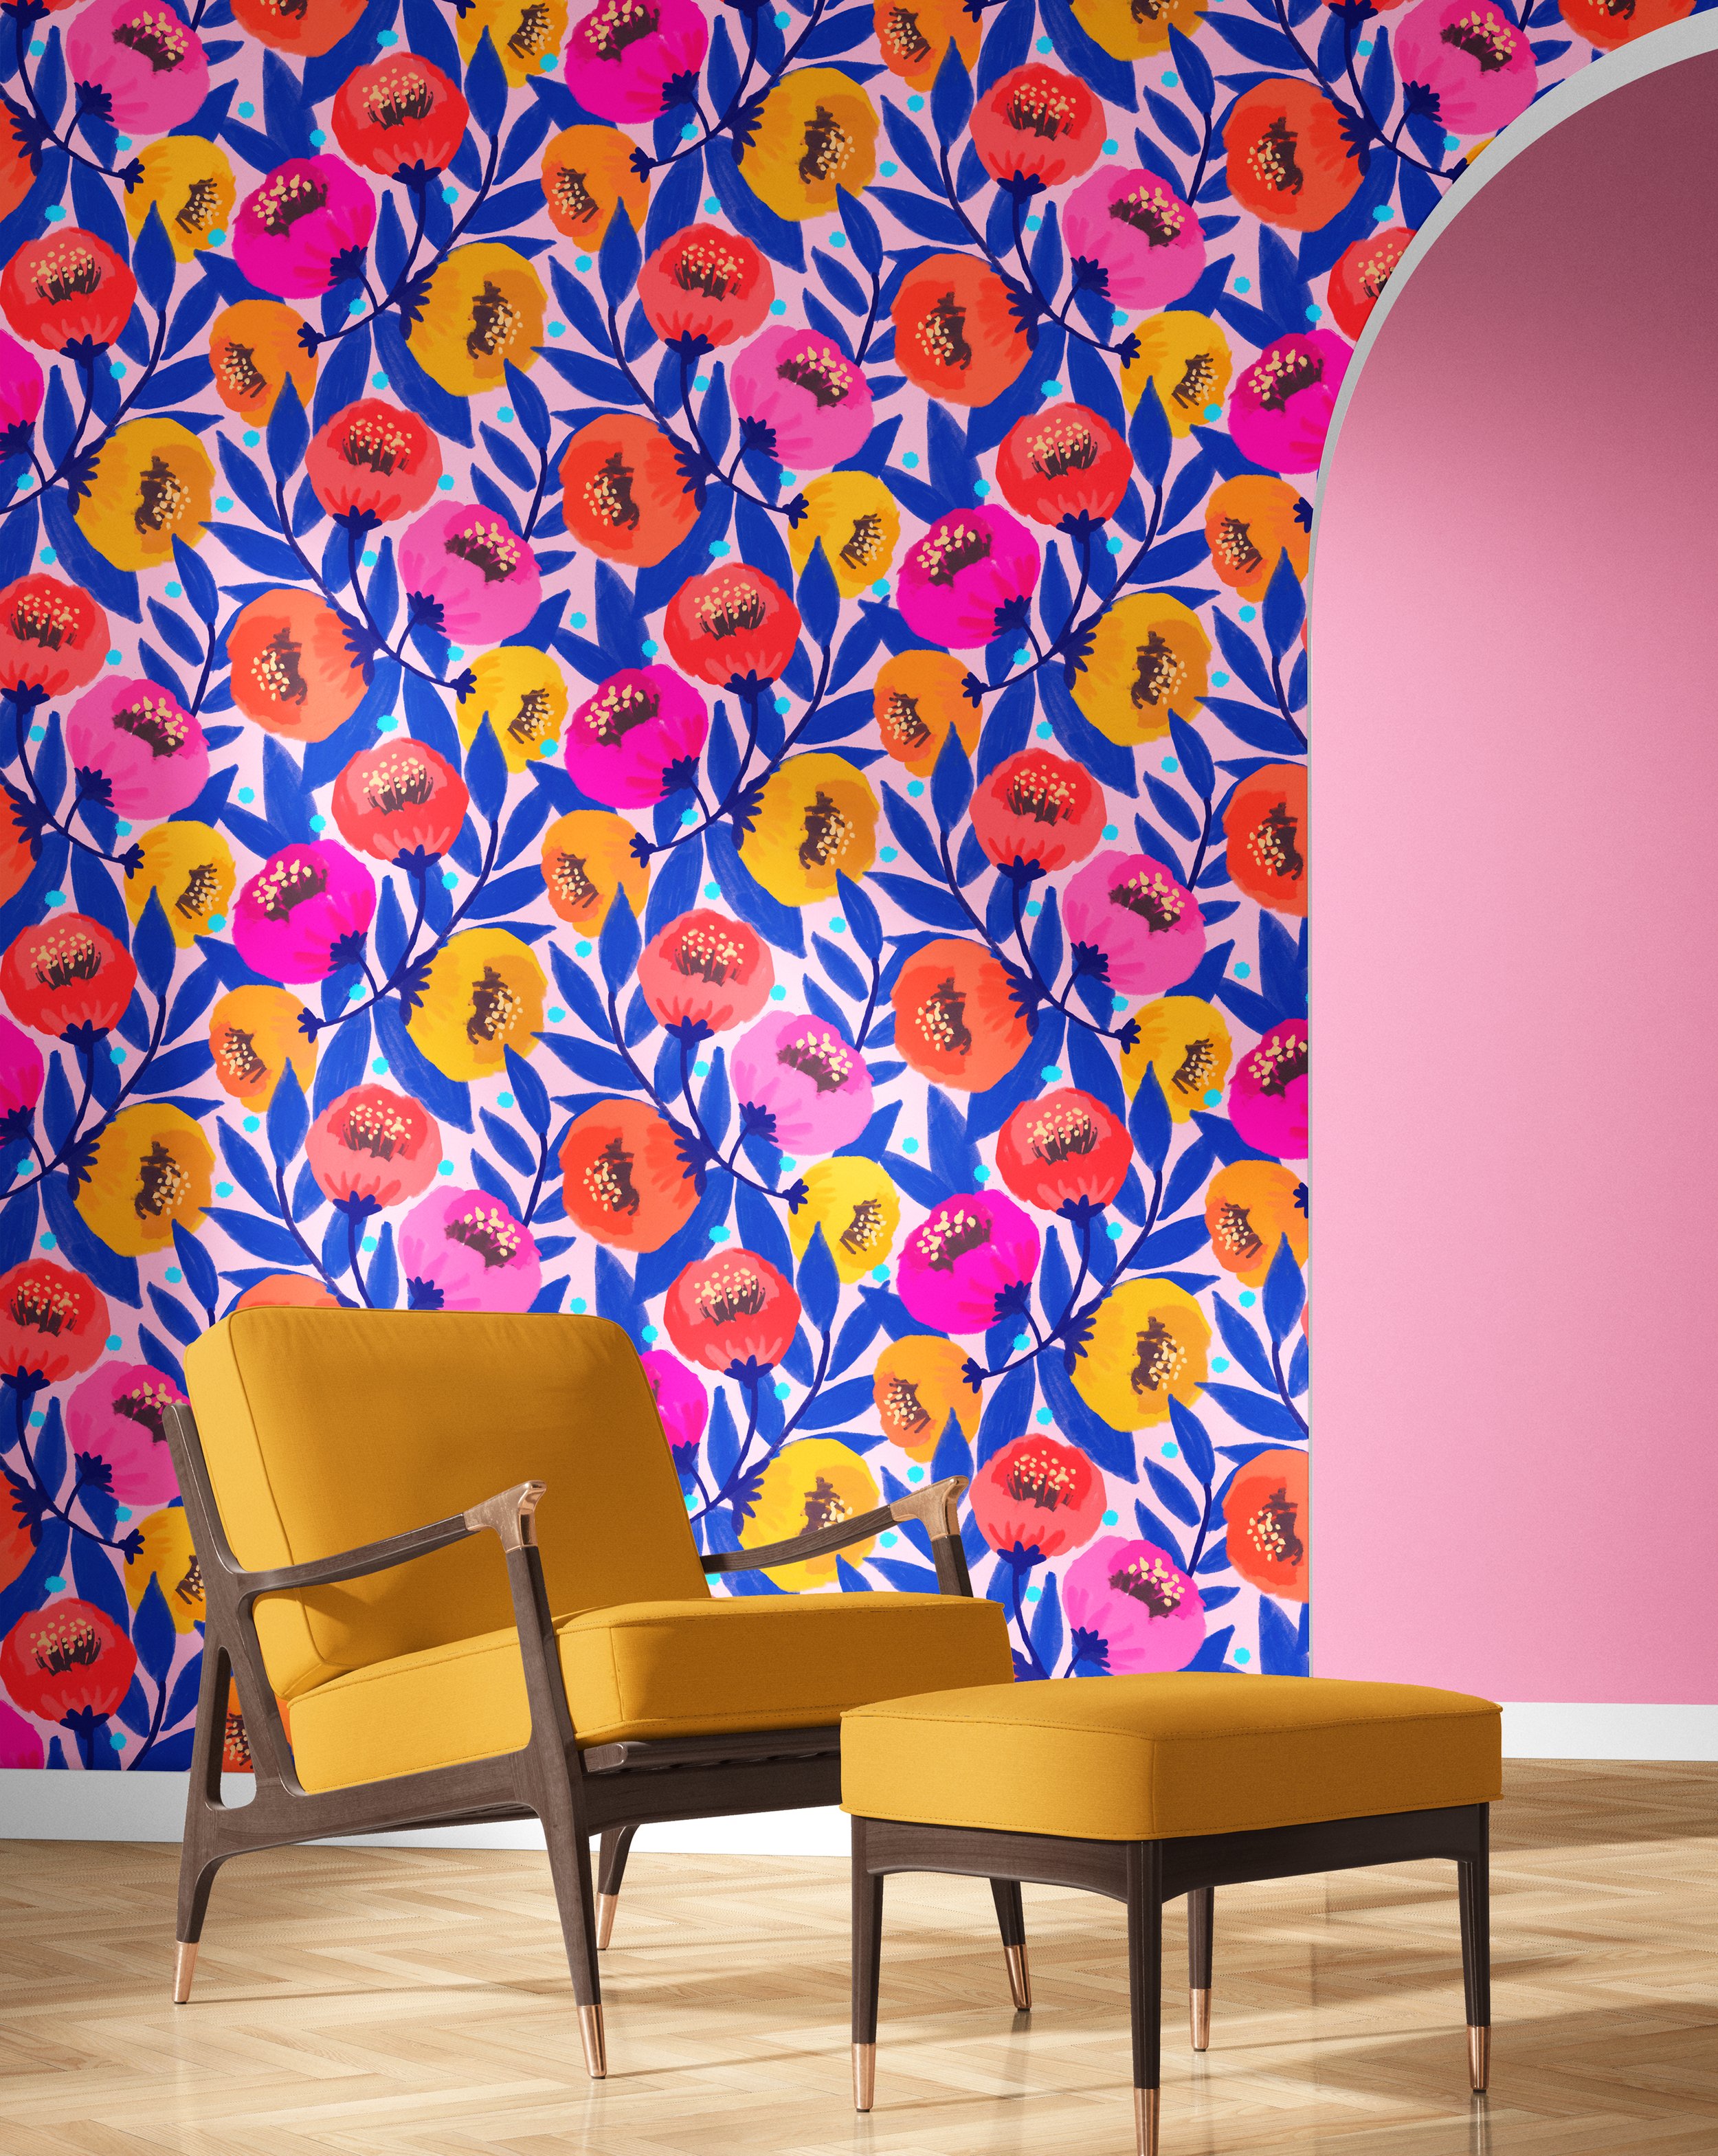 Feature Wallpaper Designs now available to buy at Happywall  KATE  MERRITT ILLUSTRATION